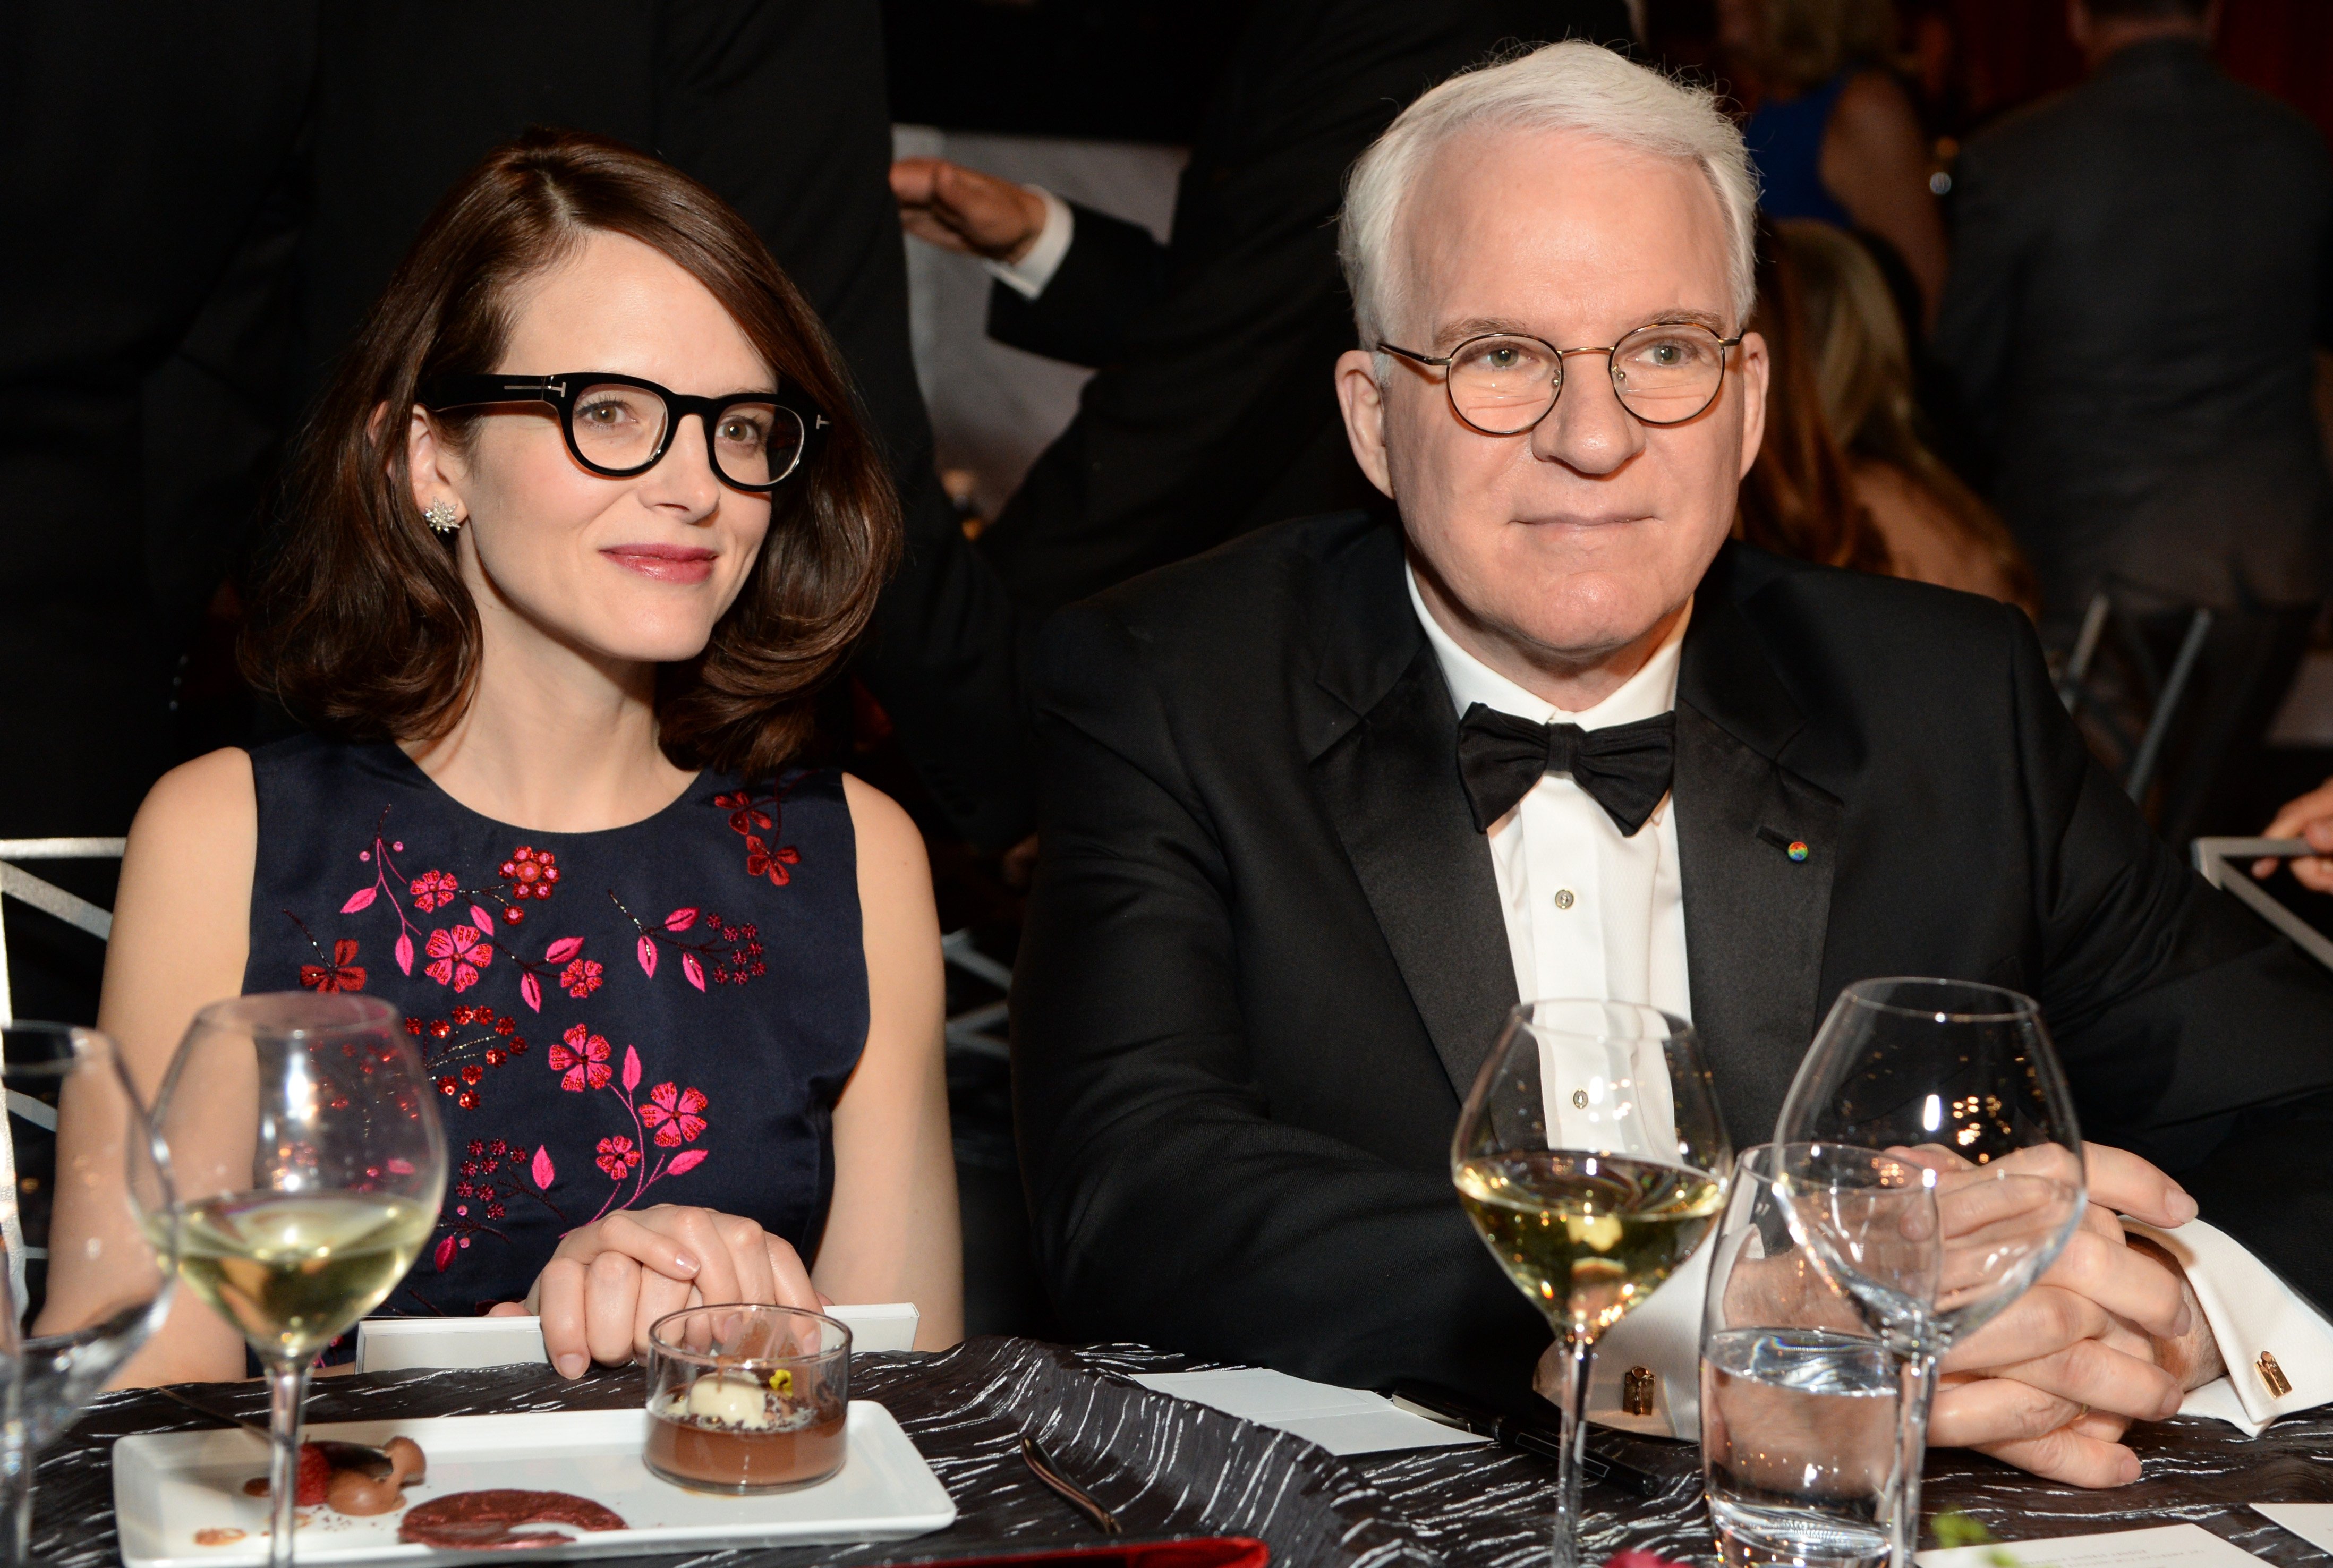 Anne Stringfield and Steve Martin attend the AFI Life Achievement Award Gala in Hollywood, California on June 4, 2015 | Photo: Getty Images